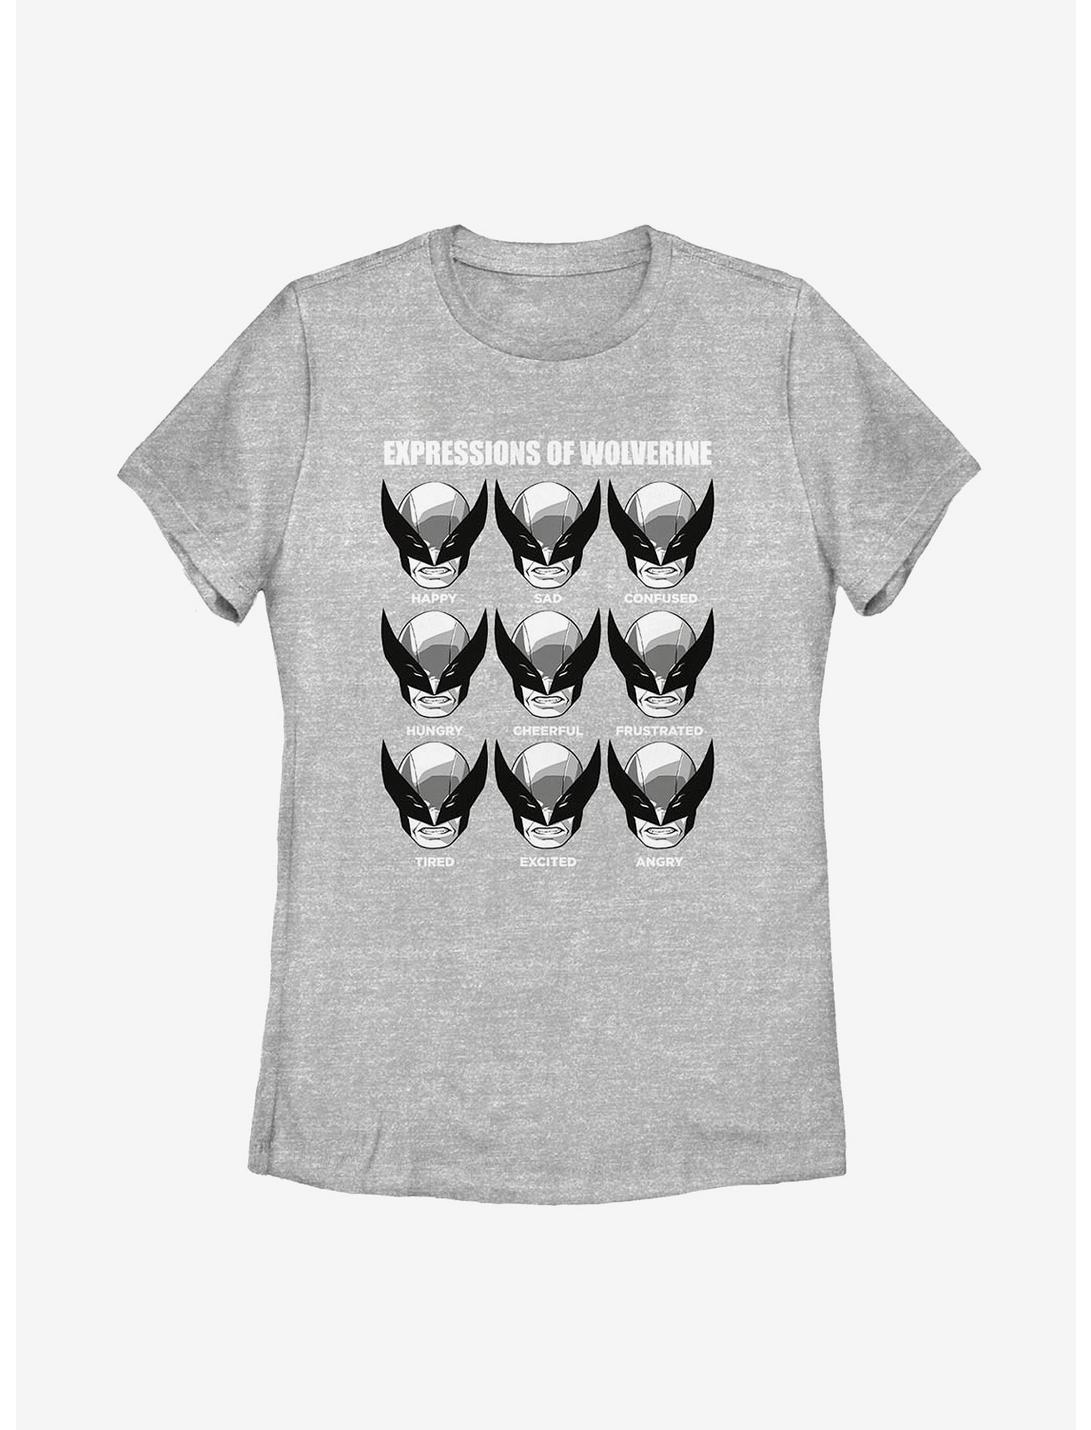 Marvel Wolverine Expressions Womens T-Shirt, ATH HTR, hi-res